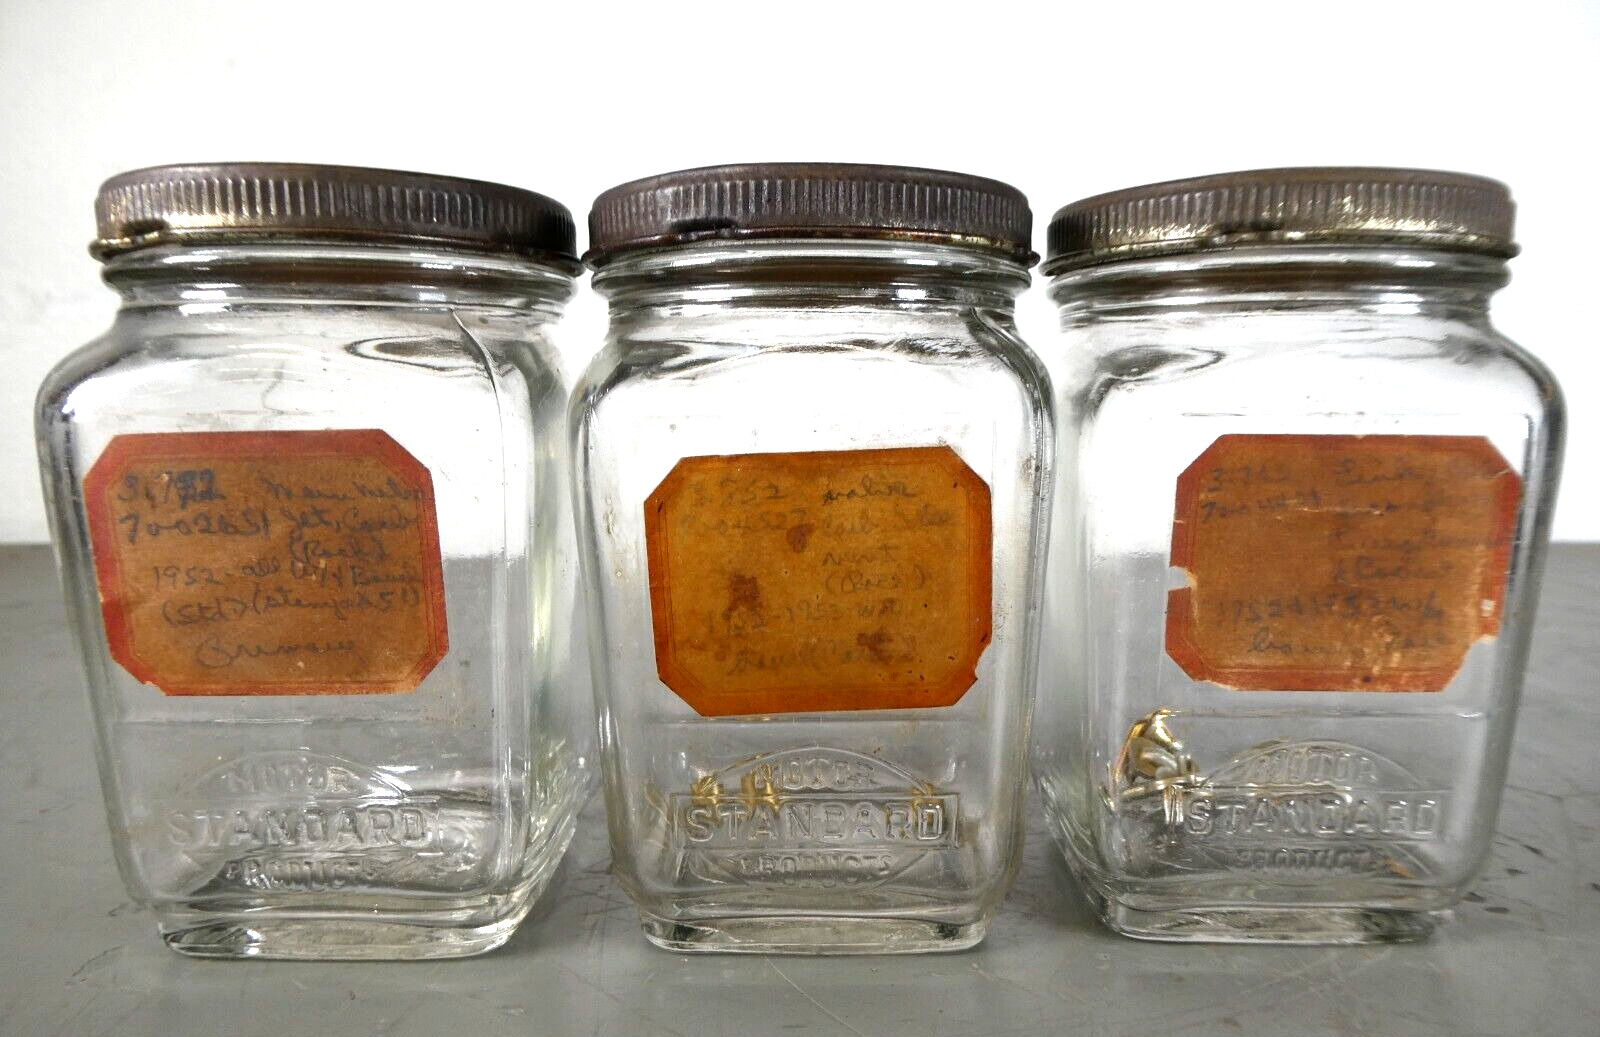 3 Vintage Owens-Illinois Glass Jars for Standard Motor Products Automotive Parts